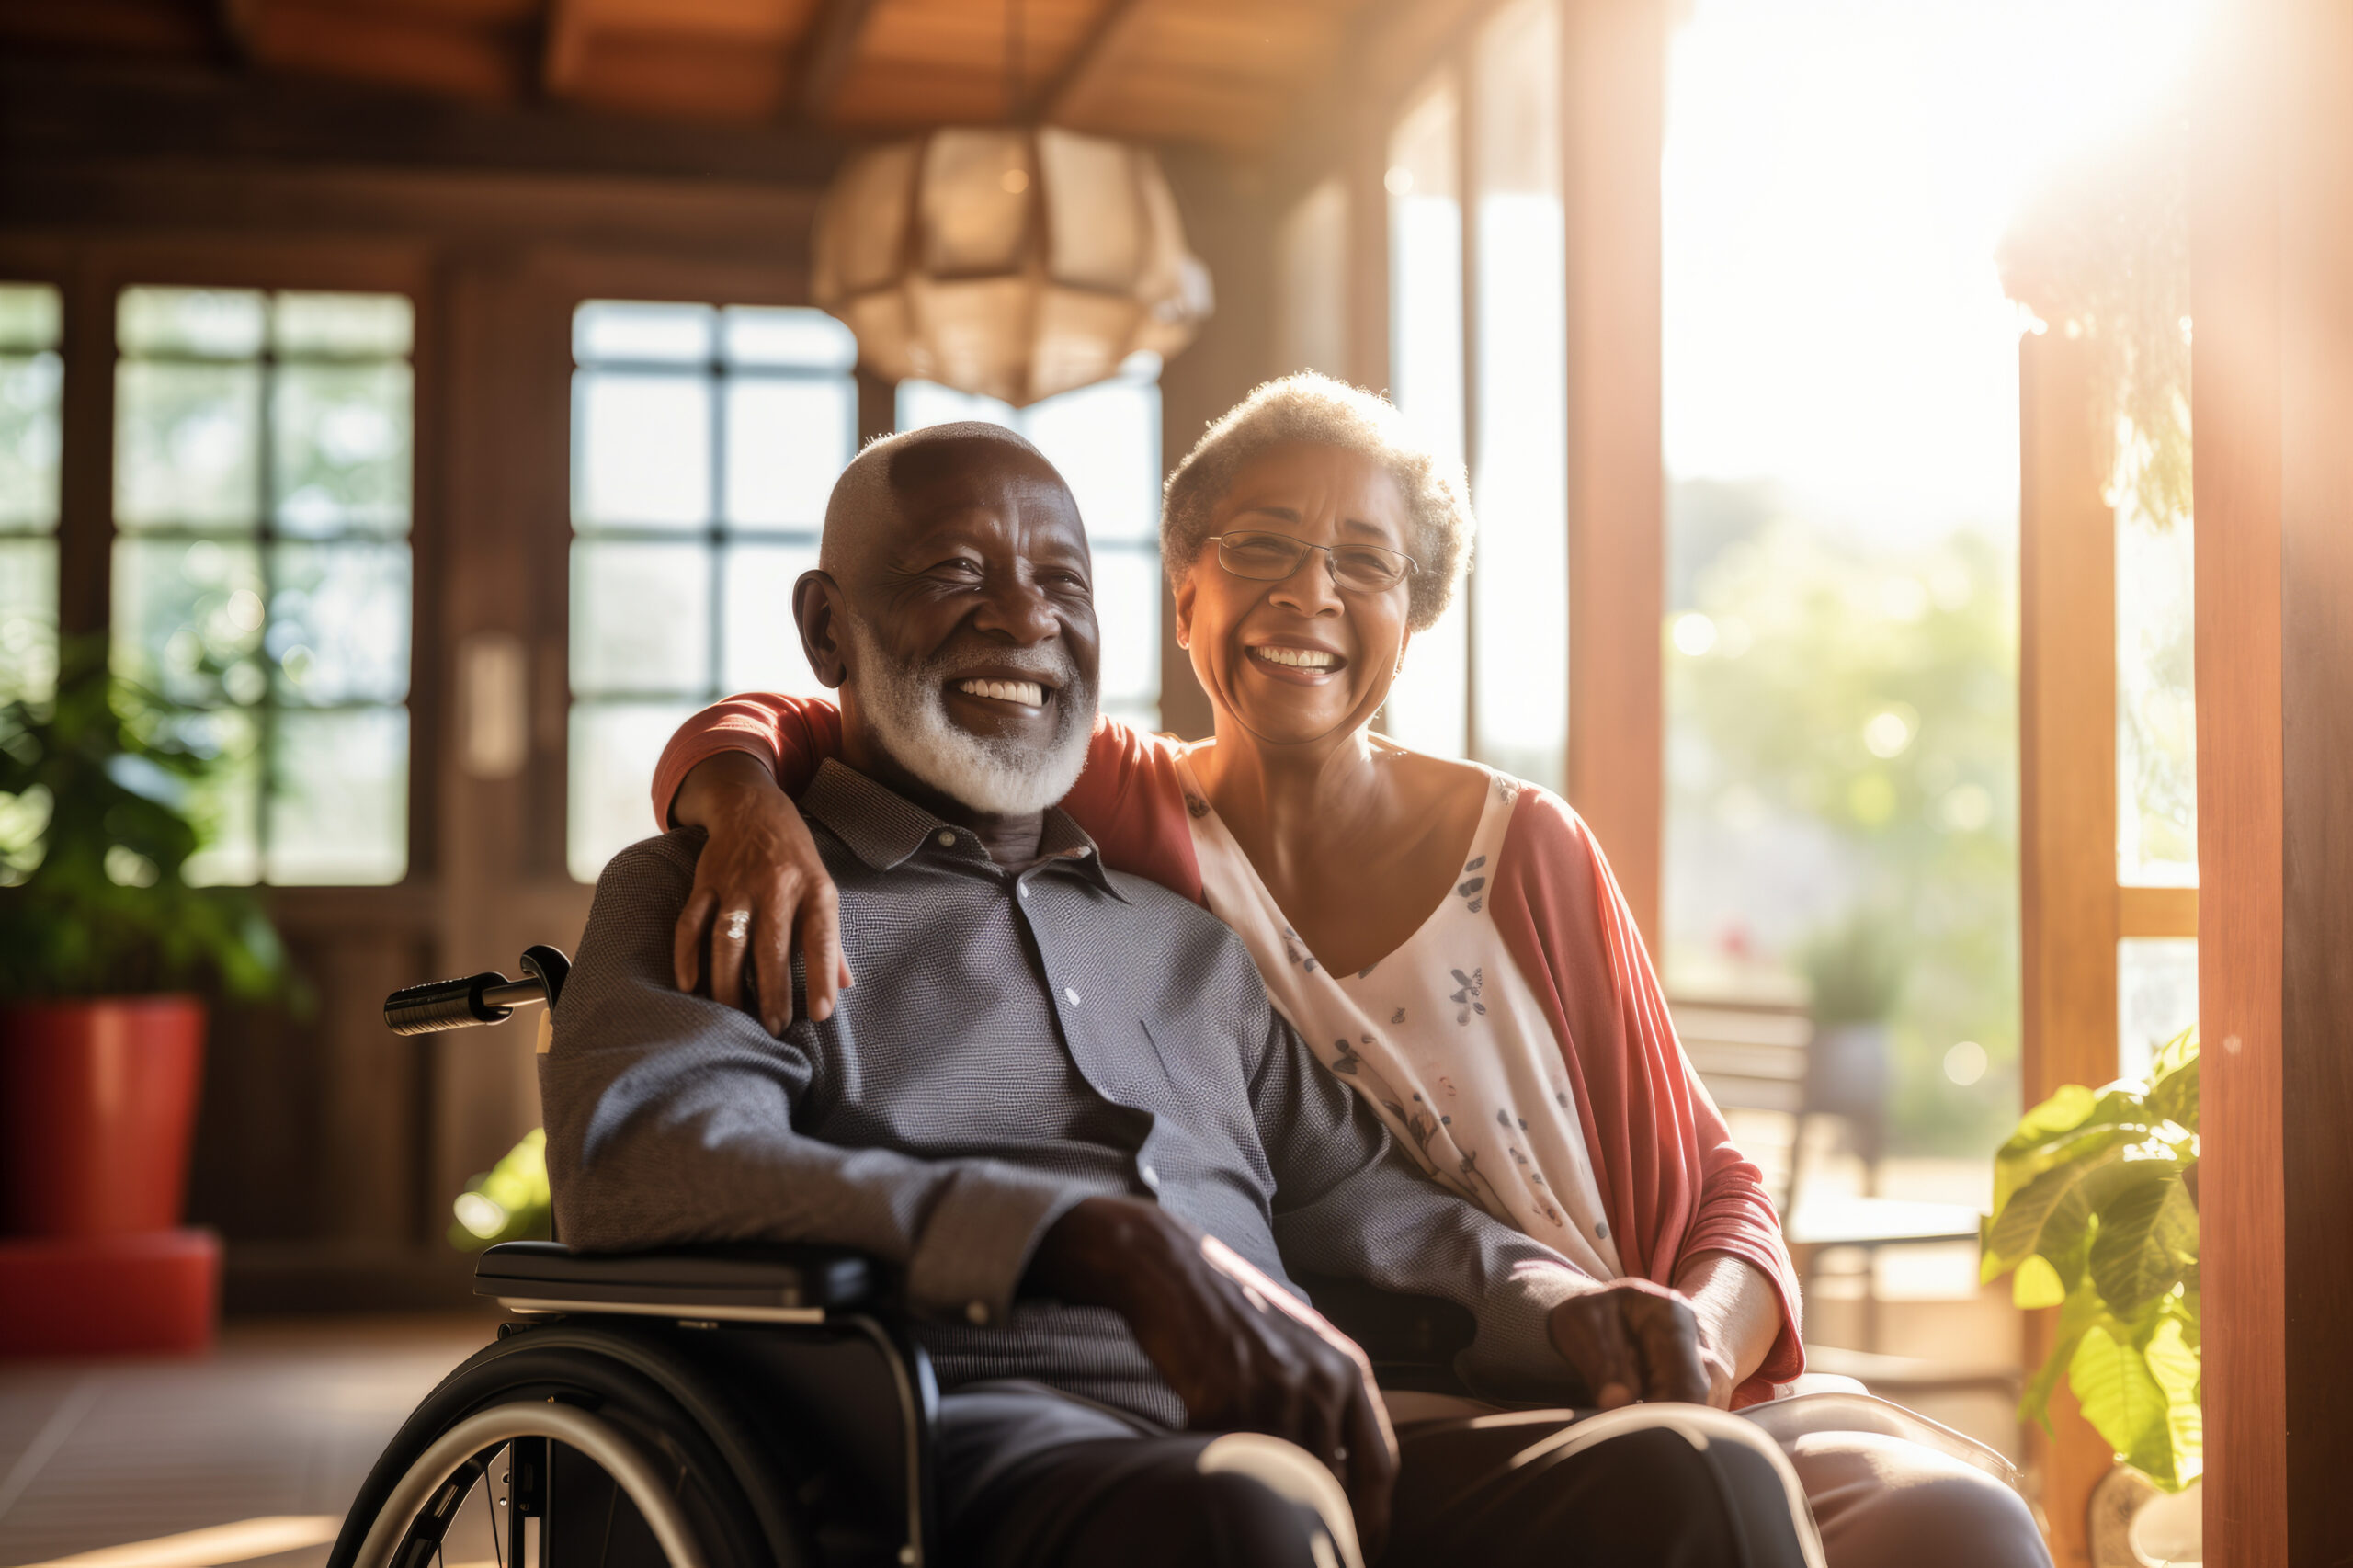 Beautiful Loving Couple In A Retirement Home Senior Man In A Wheelchair Laughing Happily With A Senior Lady In A Nursing Home Housing Facility Intended For The Elderly People